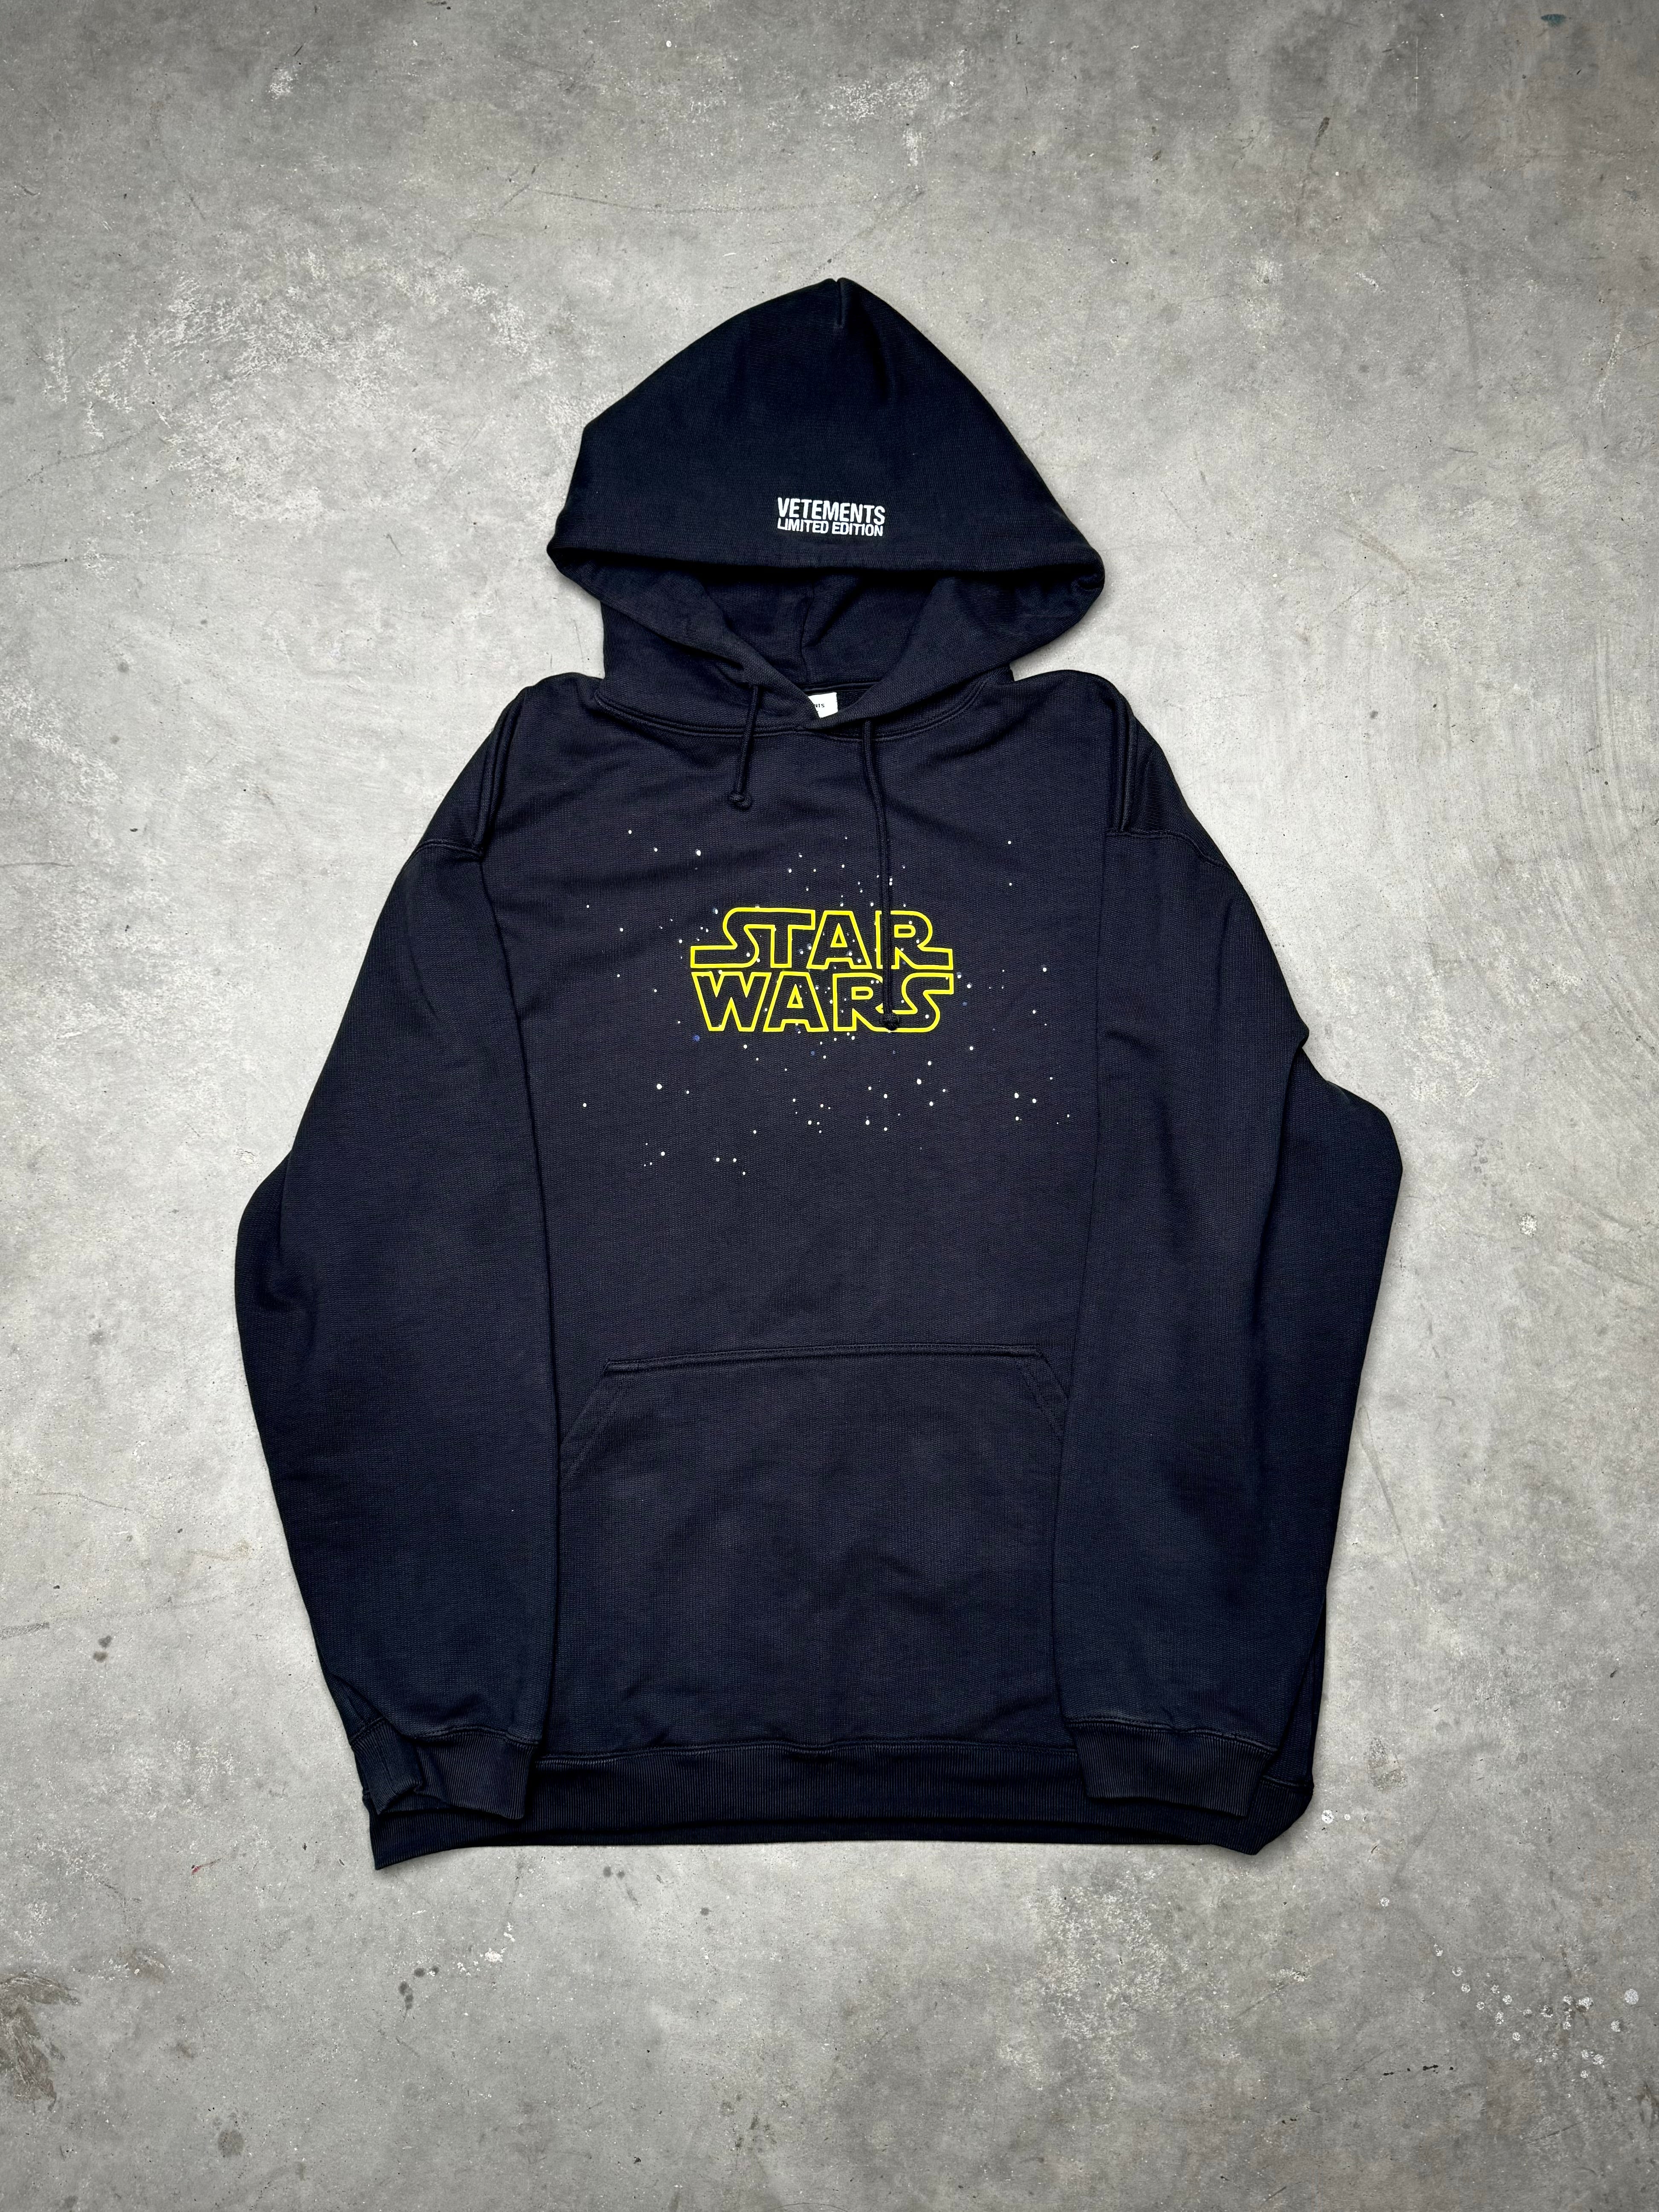 VETEMENTS Star Wars Yellow Logo Hoodie (Defective) – ARCHIVE A